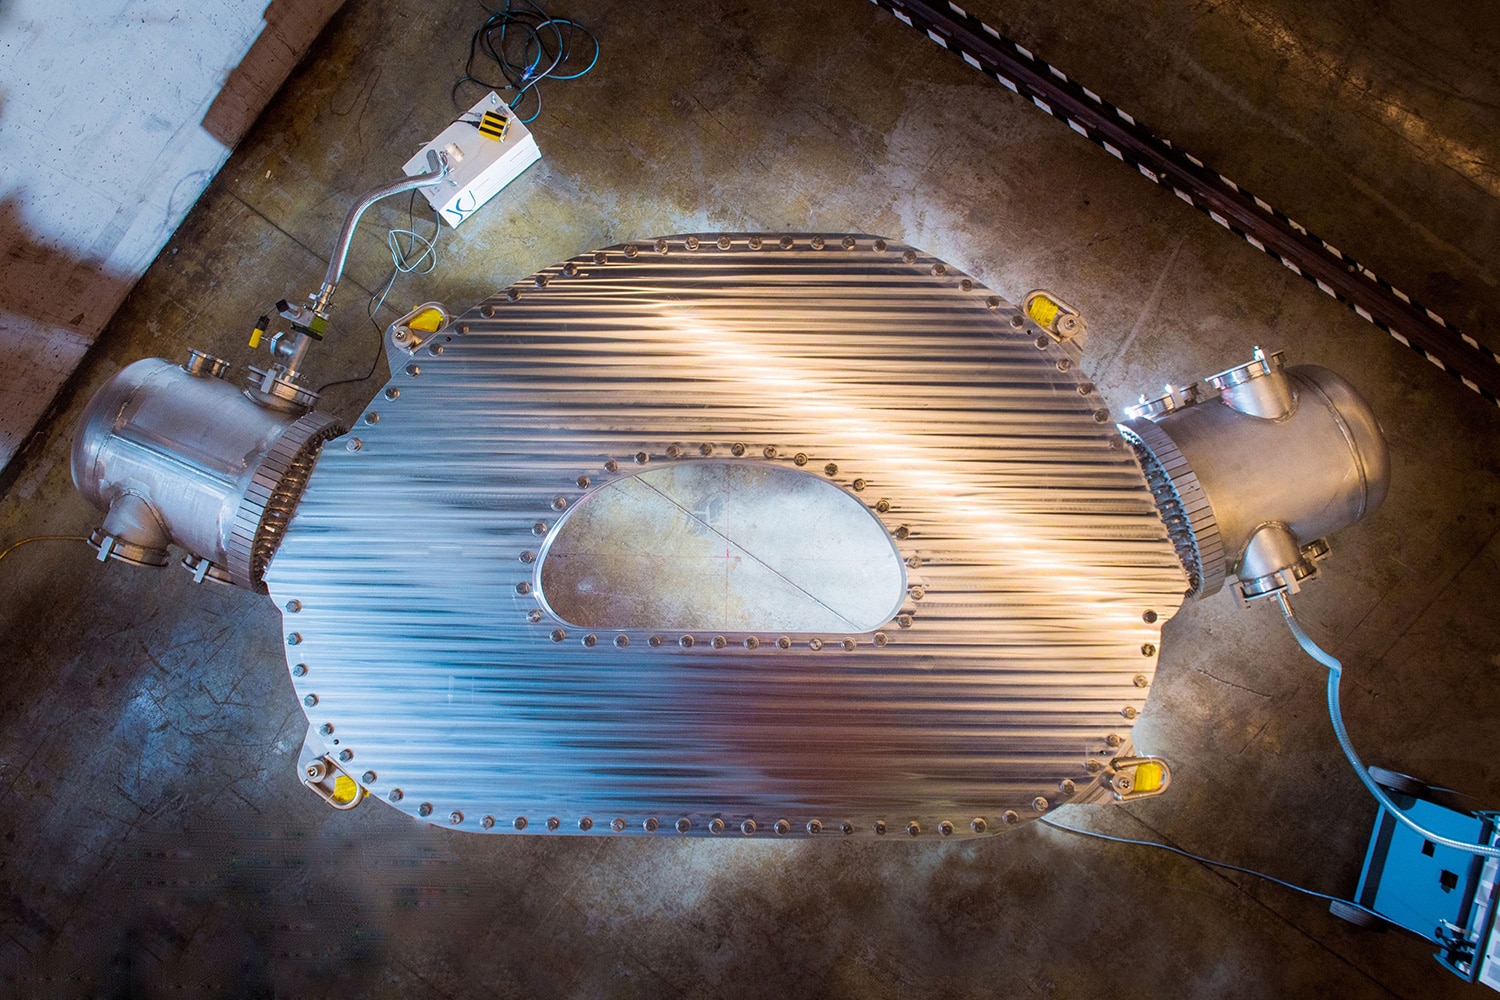 This large-bore, full-scale high-temperature superconducting magnet has demonstrated a record-breaking 20 tesla magnetic field.